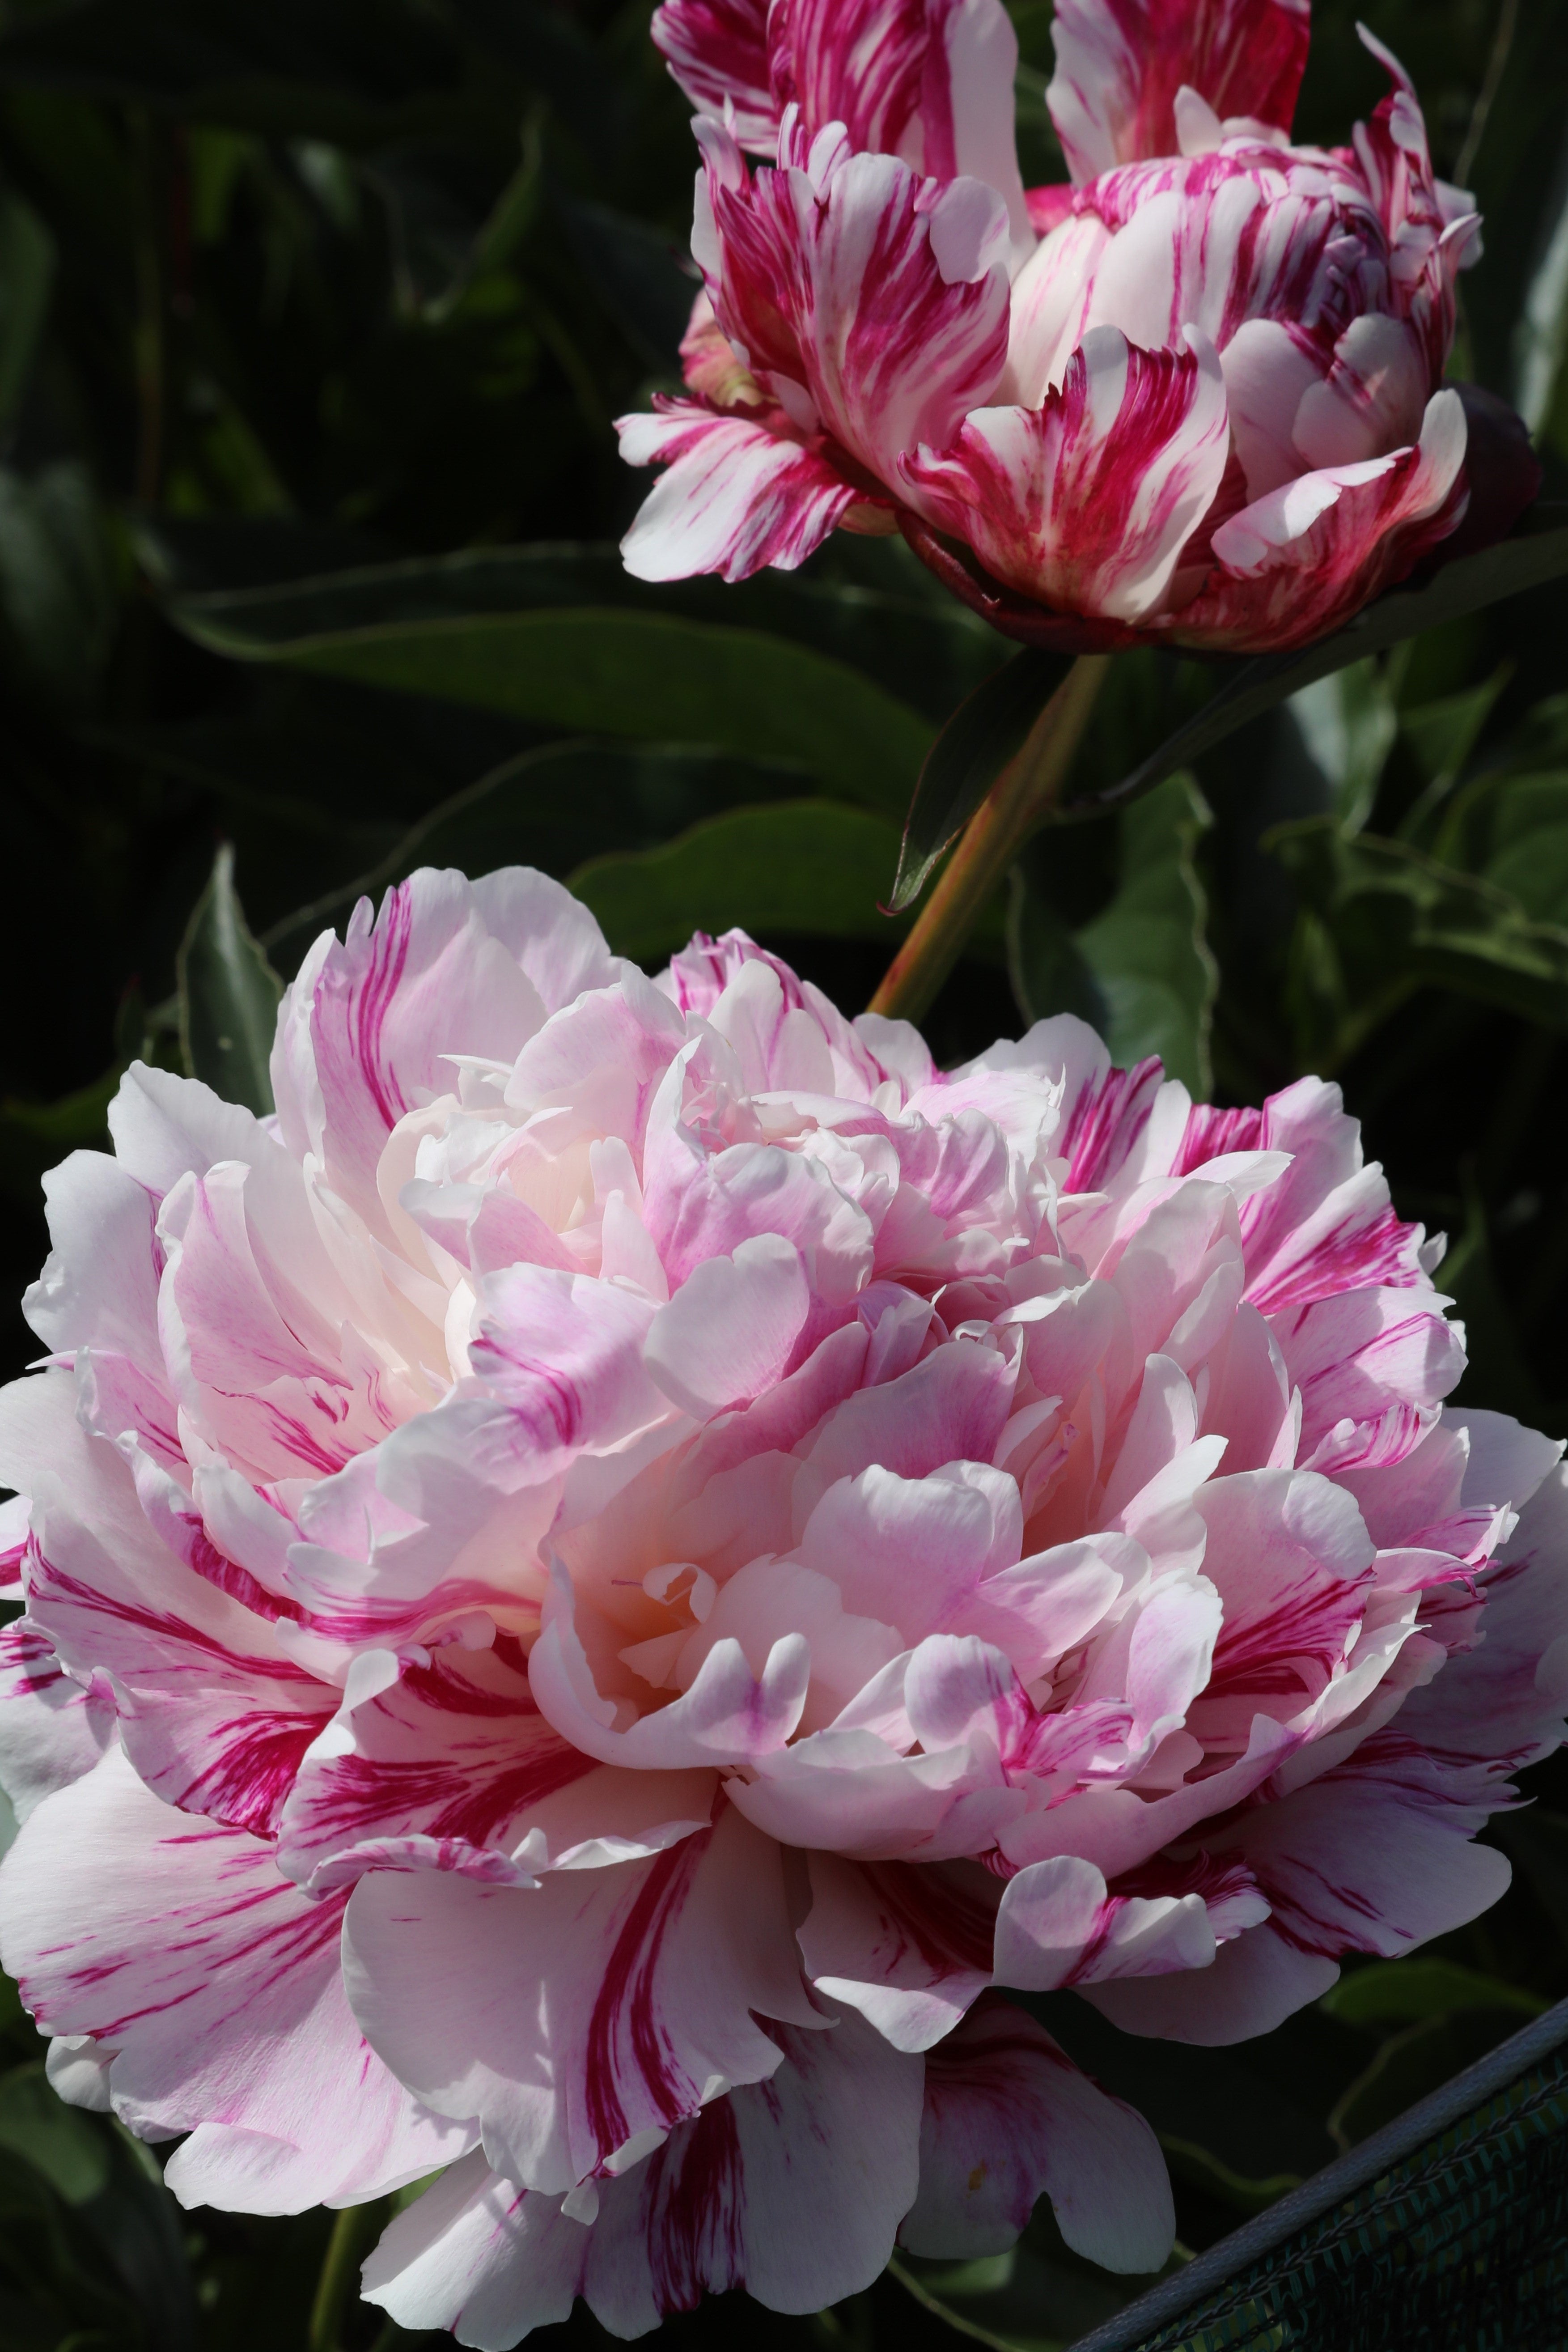 Gorgeous Candy Stripe peony with delicate pink and white petals.